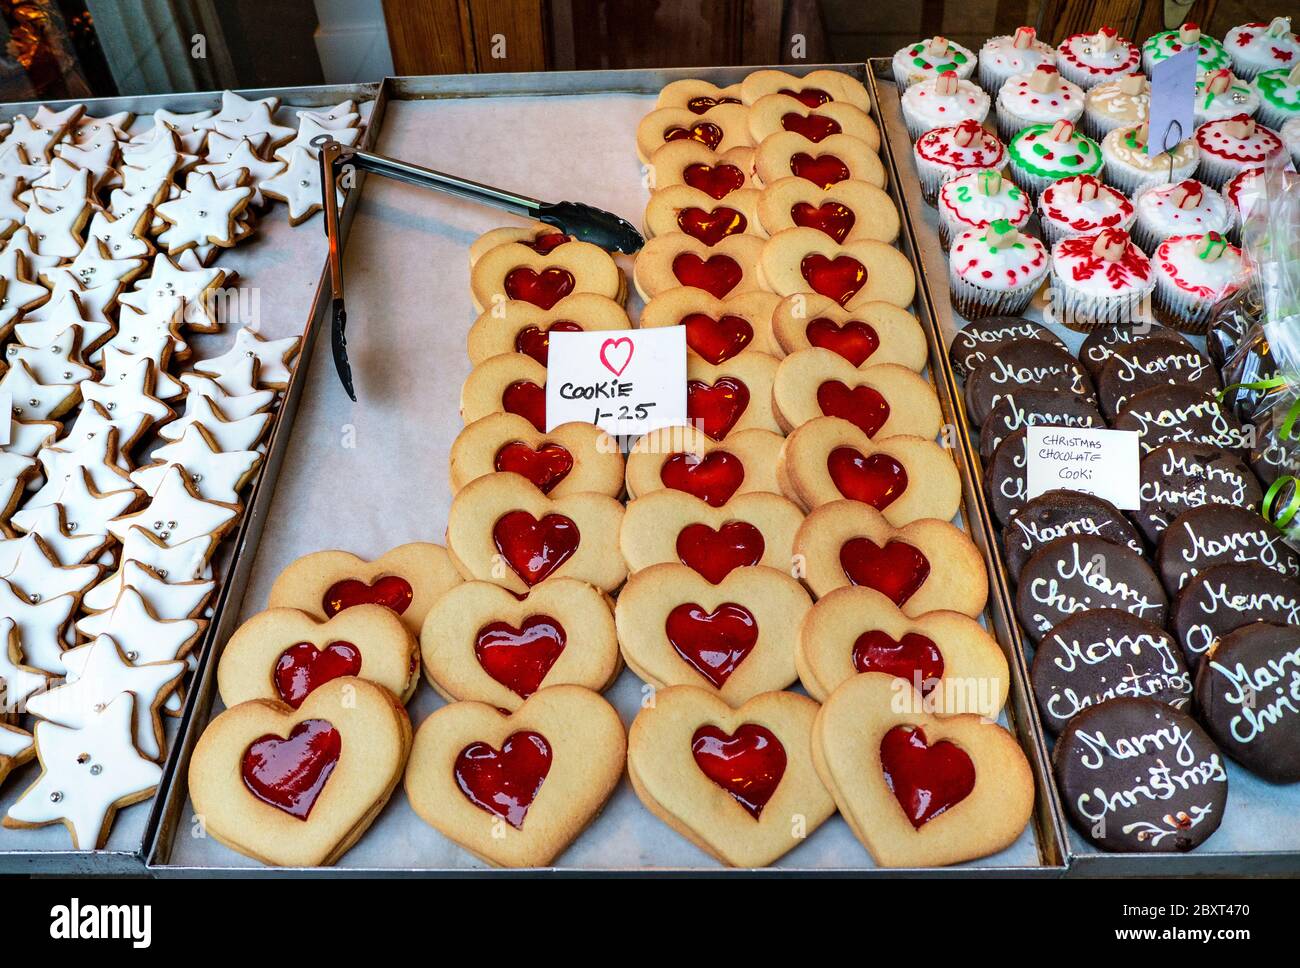 CHRISTMAS BISCUITS COOKIES JAM HEARTS STALL Heart shaped 'Love'  cookies on sale at  Borough Market a popular produce retail market Southwark London Stock Photo